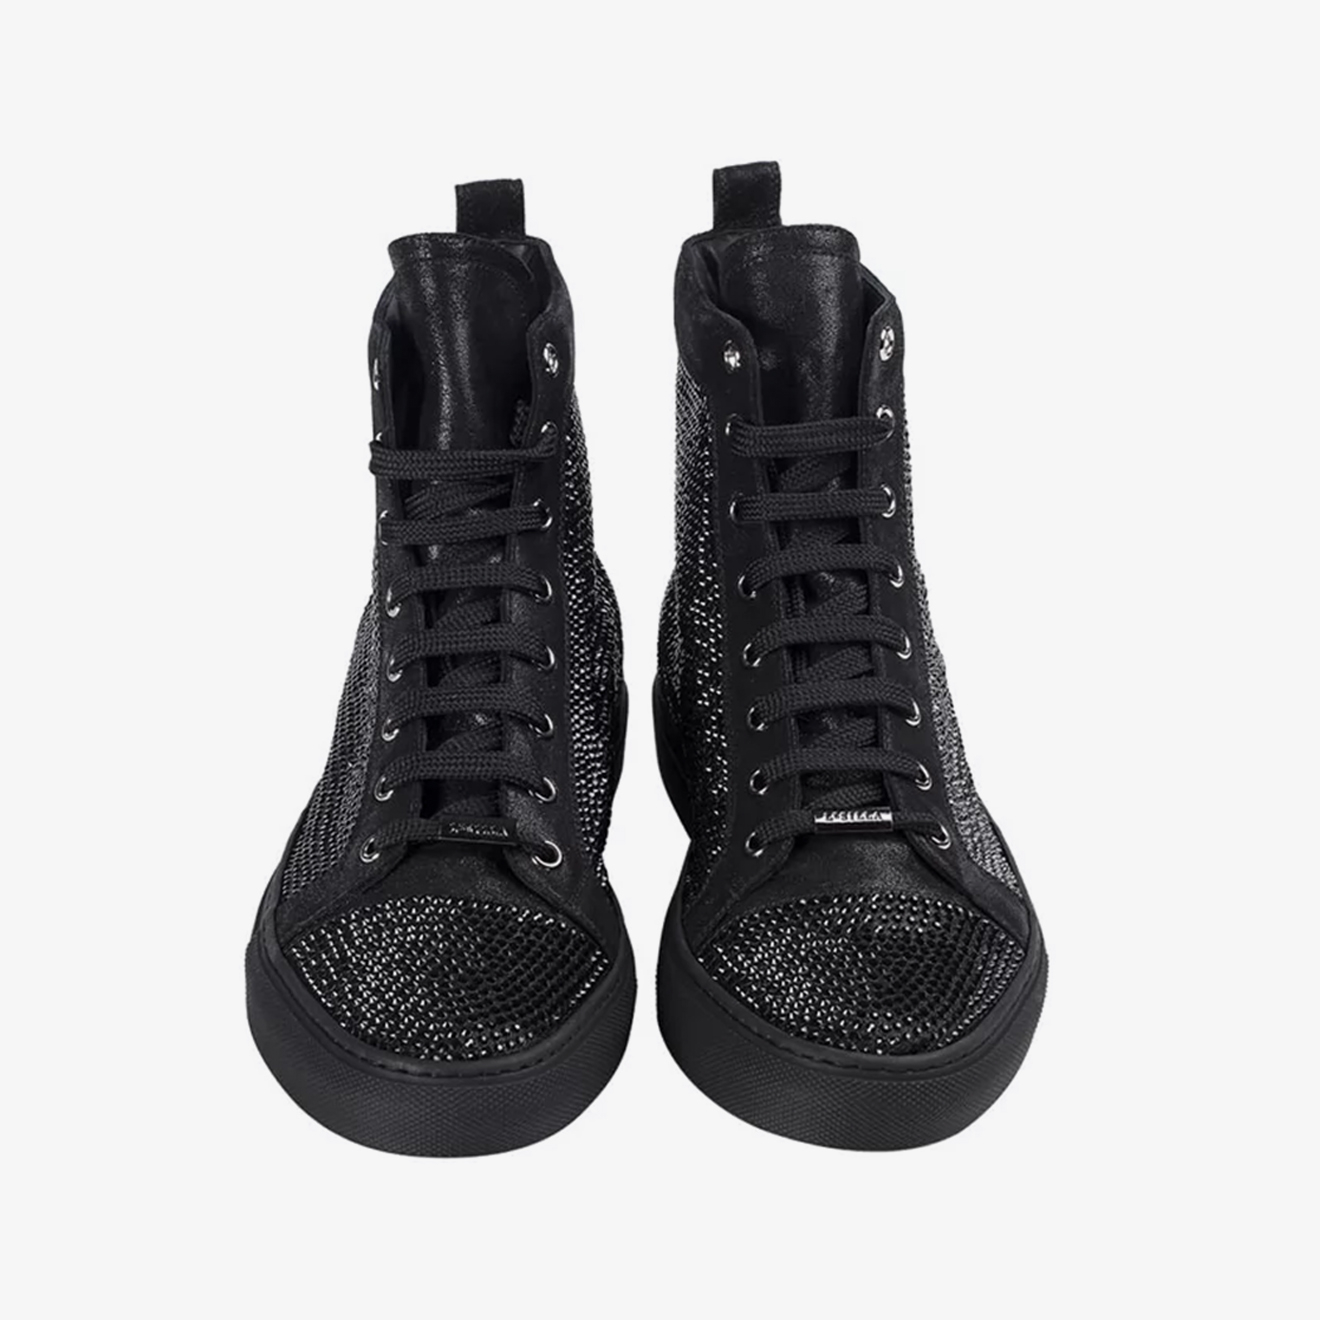 QUEEN SNEAKER fur inner lining - Le Silla official outlet